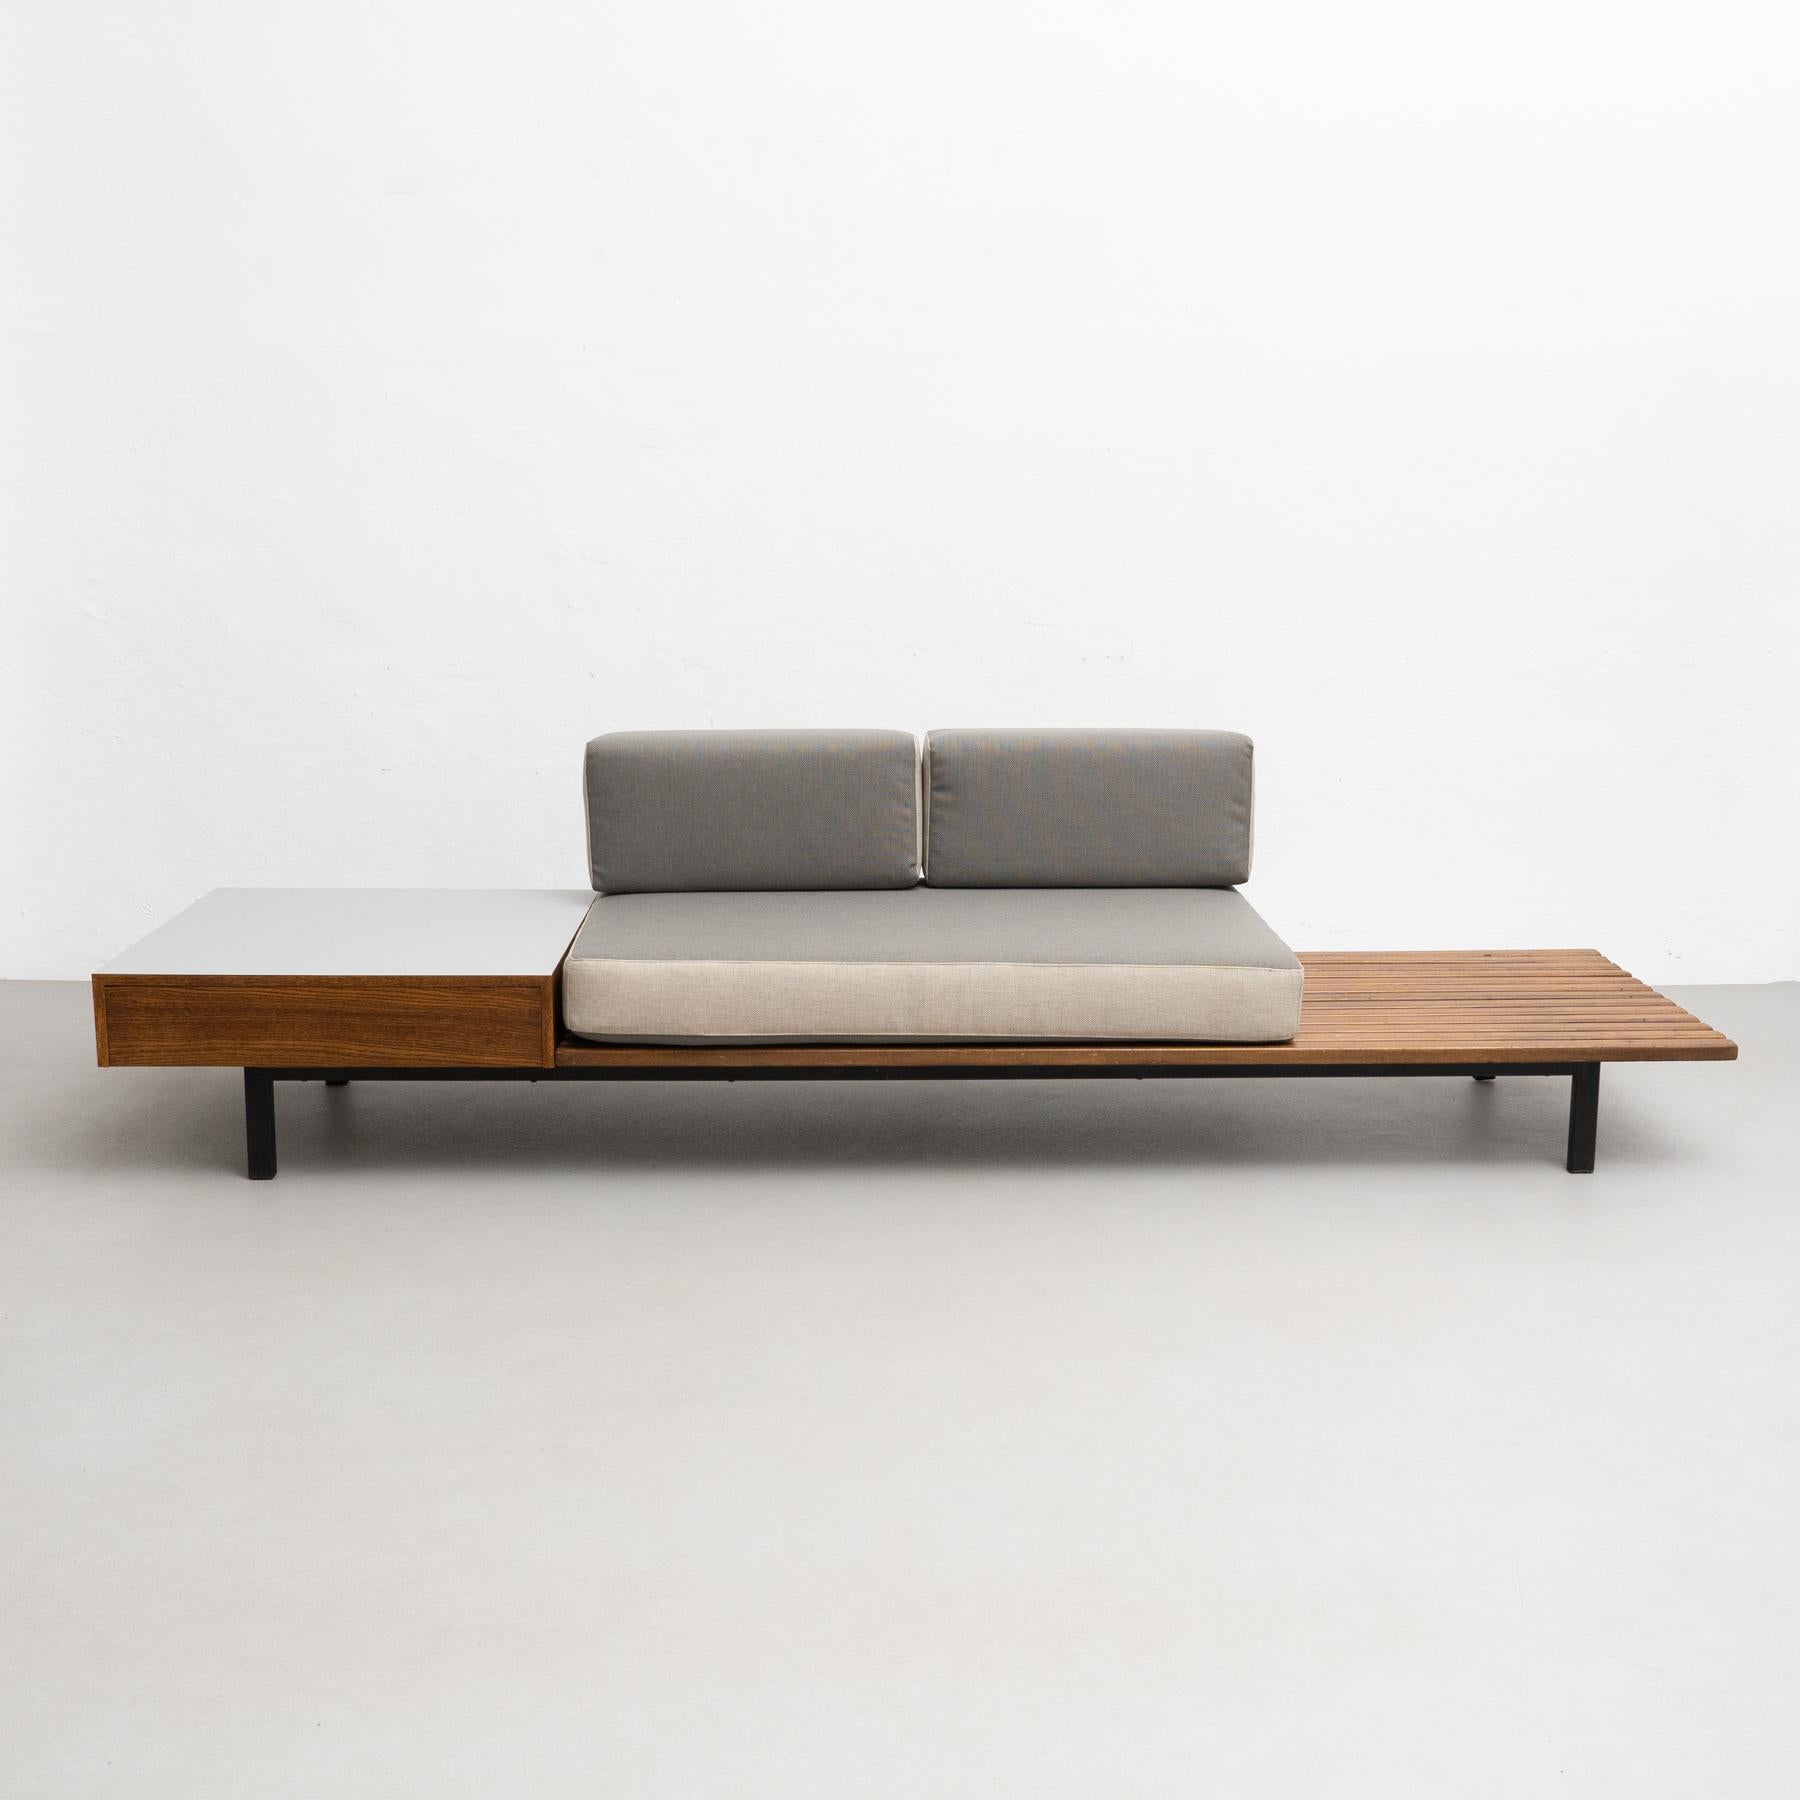 Bench with side table and drawer and cushions from Cite Cansado, Mauritania.

Designed by Charlotte Perriand in France circa 1958.

Mahogany wood, oak, plastic laminated covered wood, lacquered metal and fabric.

In good original condition,